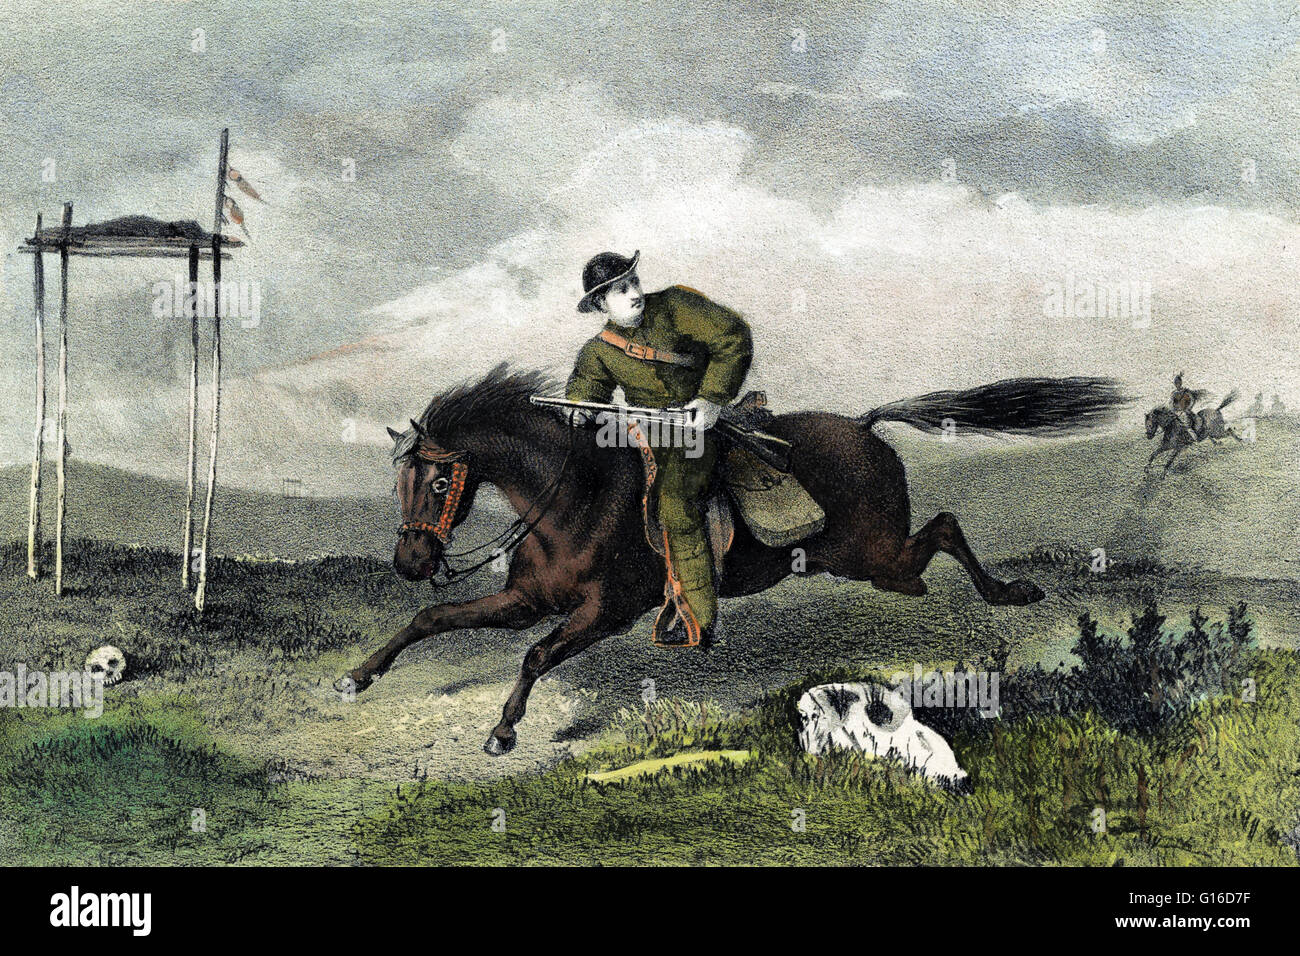 Entitled: 'The Persuit (sic).' Hand-colored lithograph of man from the Pony Express, on horseback, fleeing from Indians, on Indian burial grounds issued from Bufford's Print Publishing House, 1860s. The Pony Express was a mail service delivering messages, Stock Photo